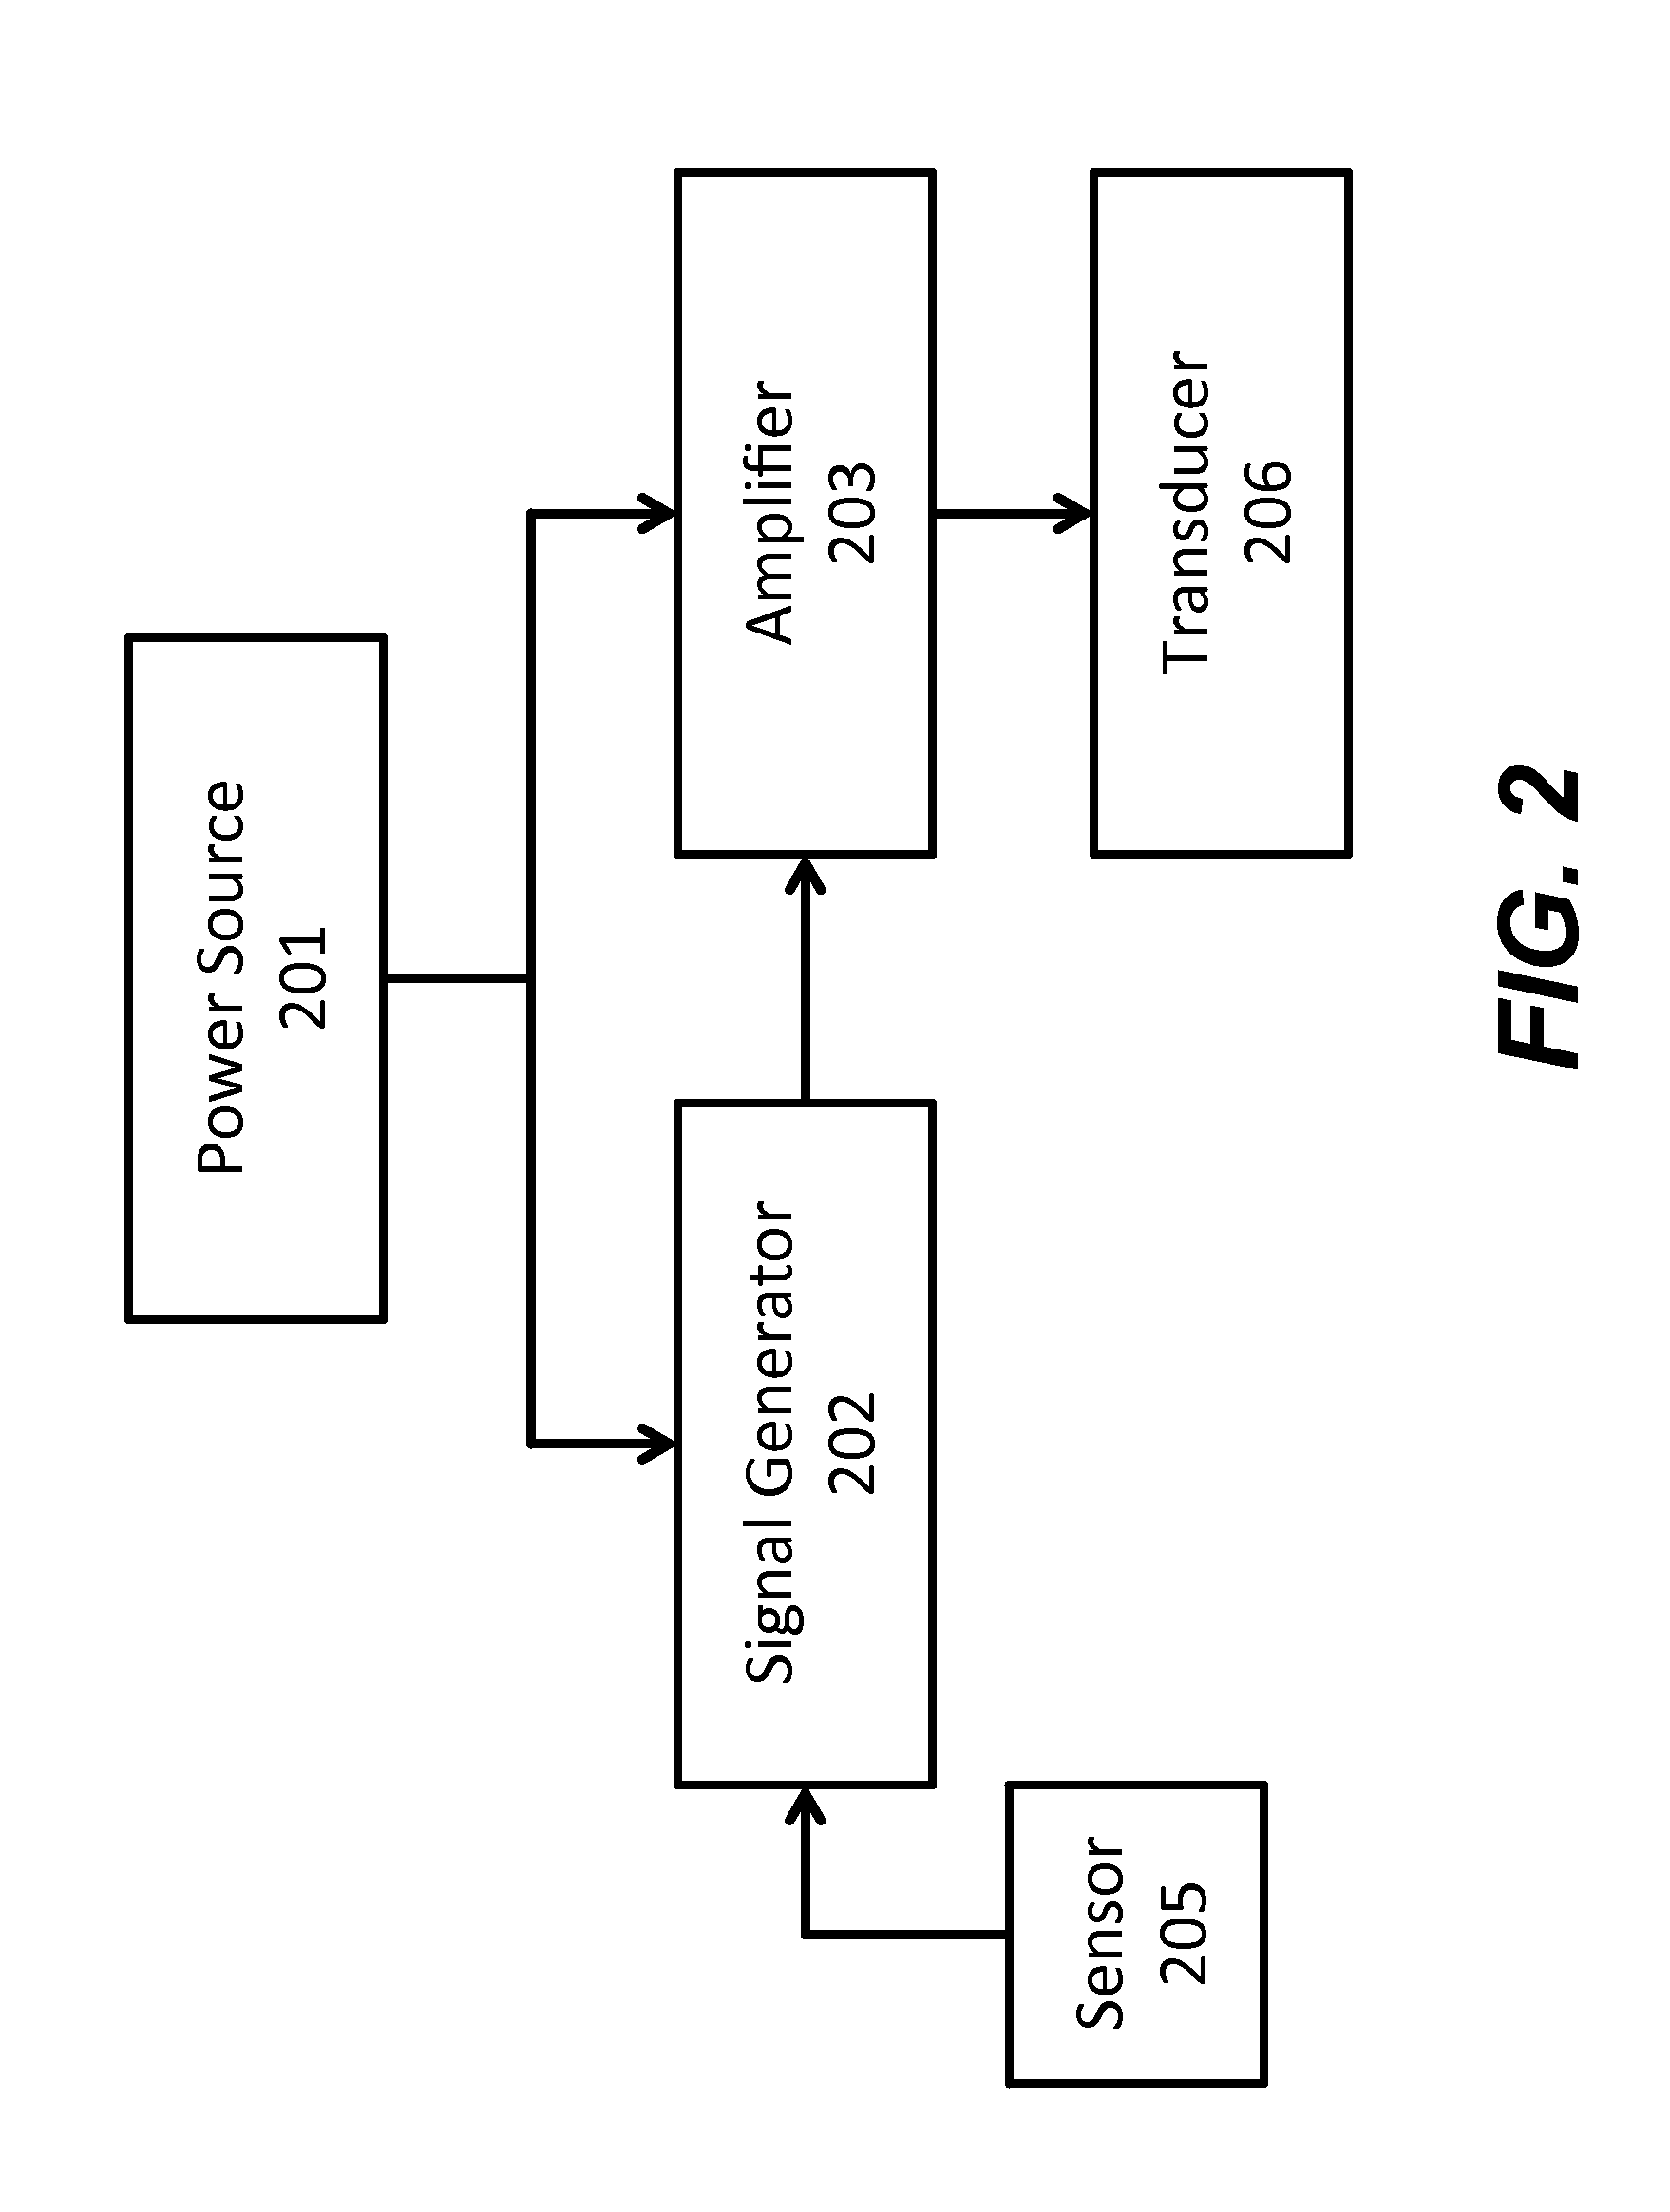 Device for Mitigating Motion Sickness and Other Responses to Inconsistent Sensory Information